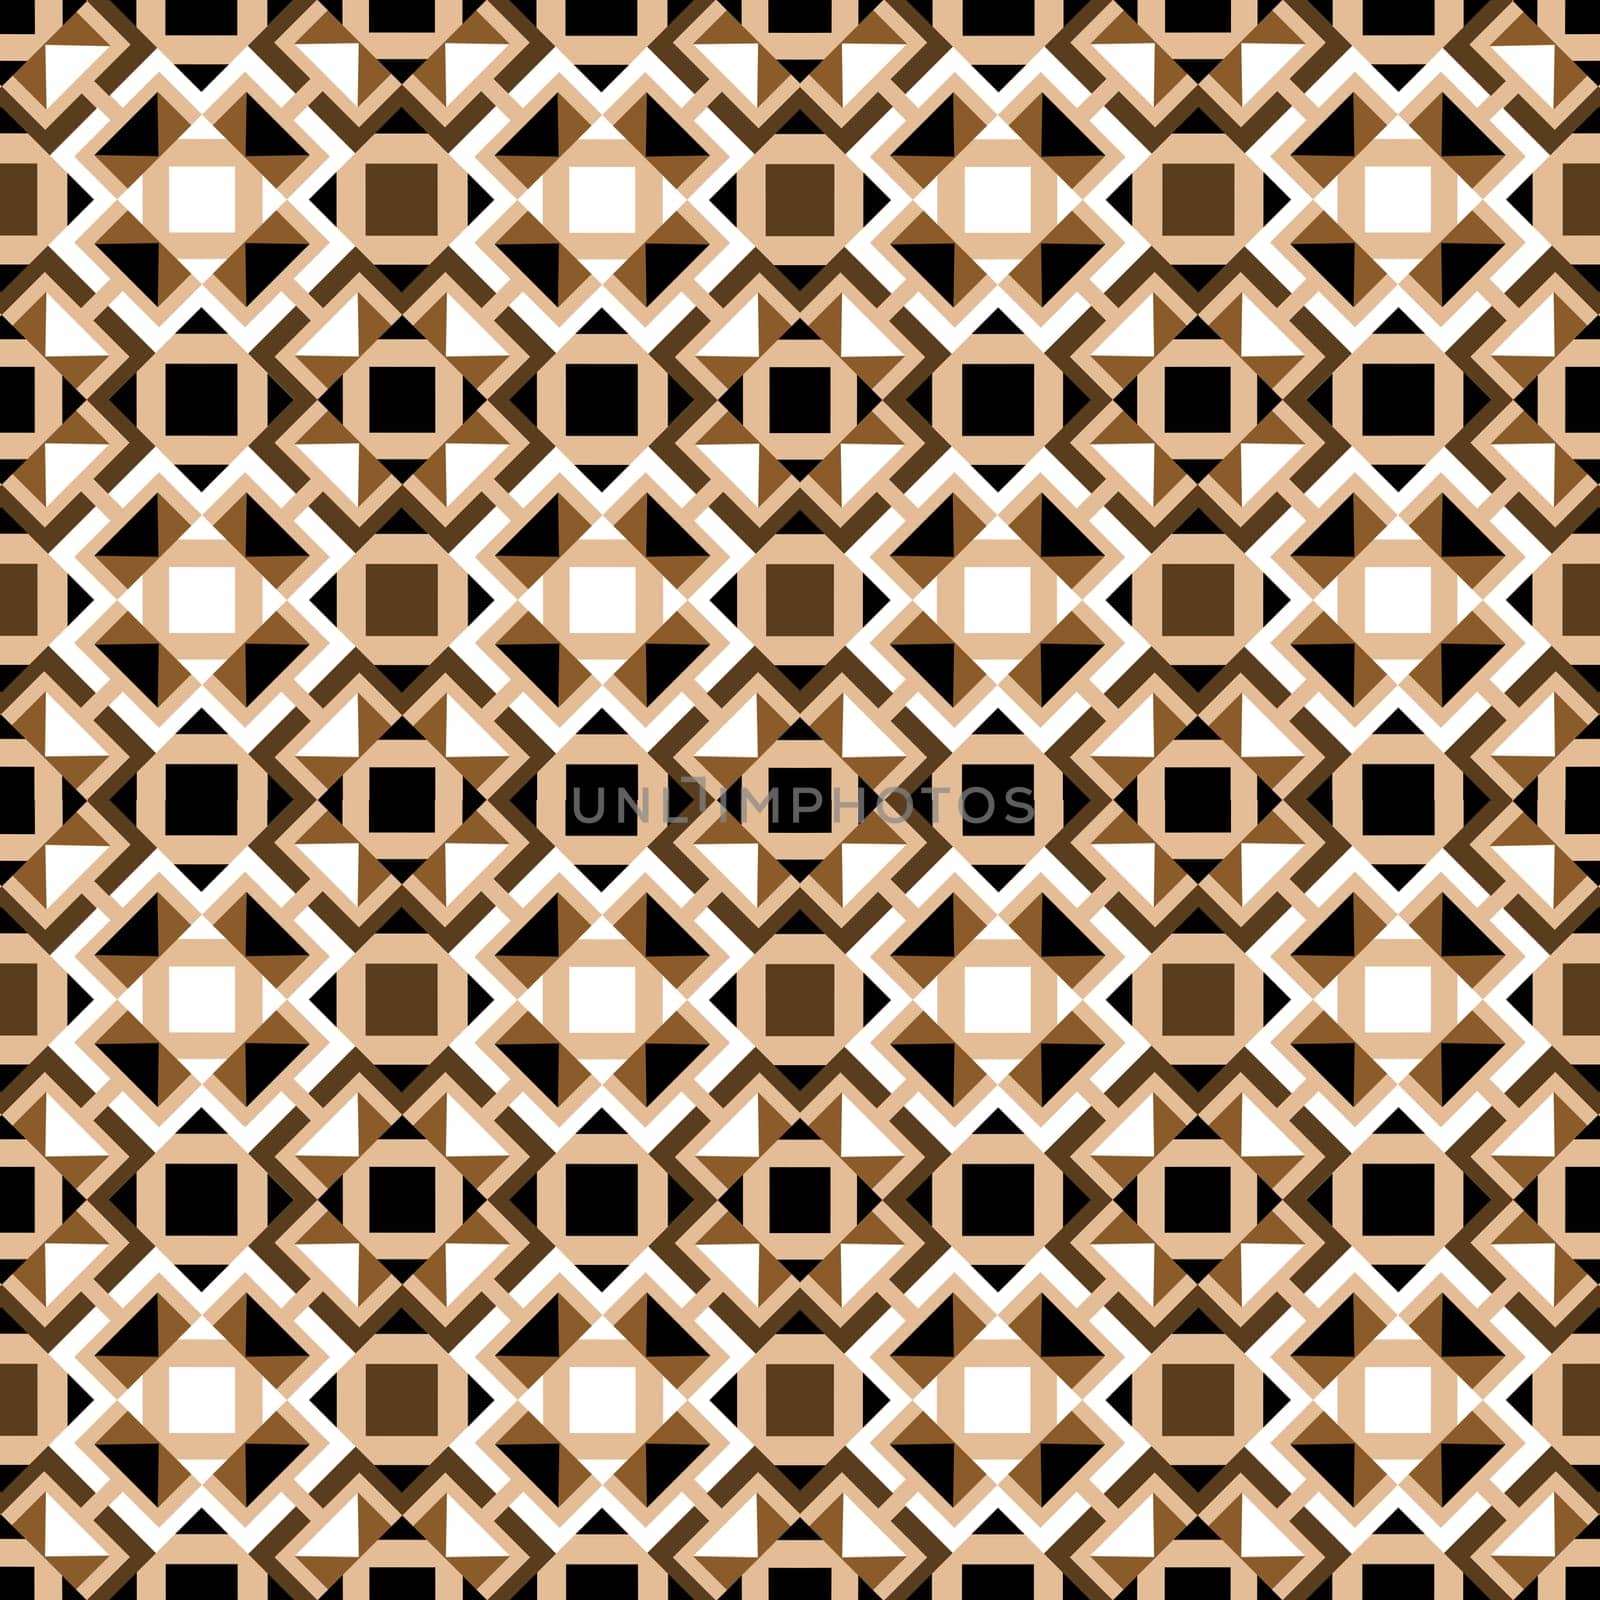 Geometric seamless pattern in brown and white tones by hibrida13